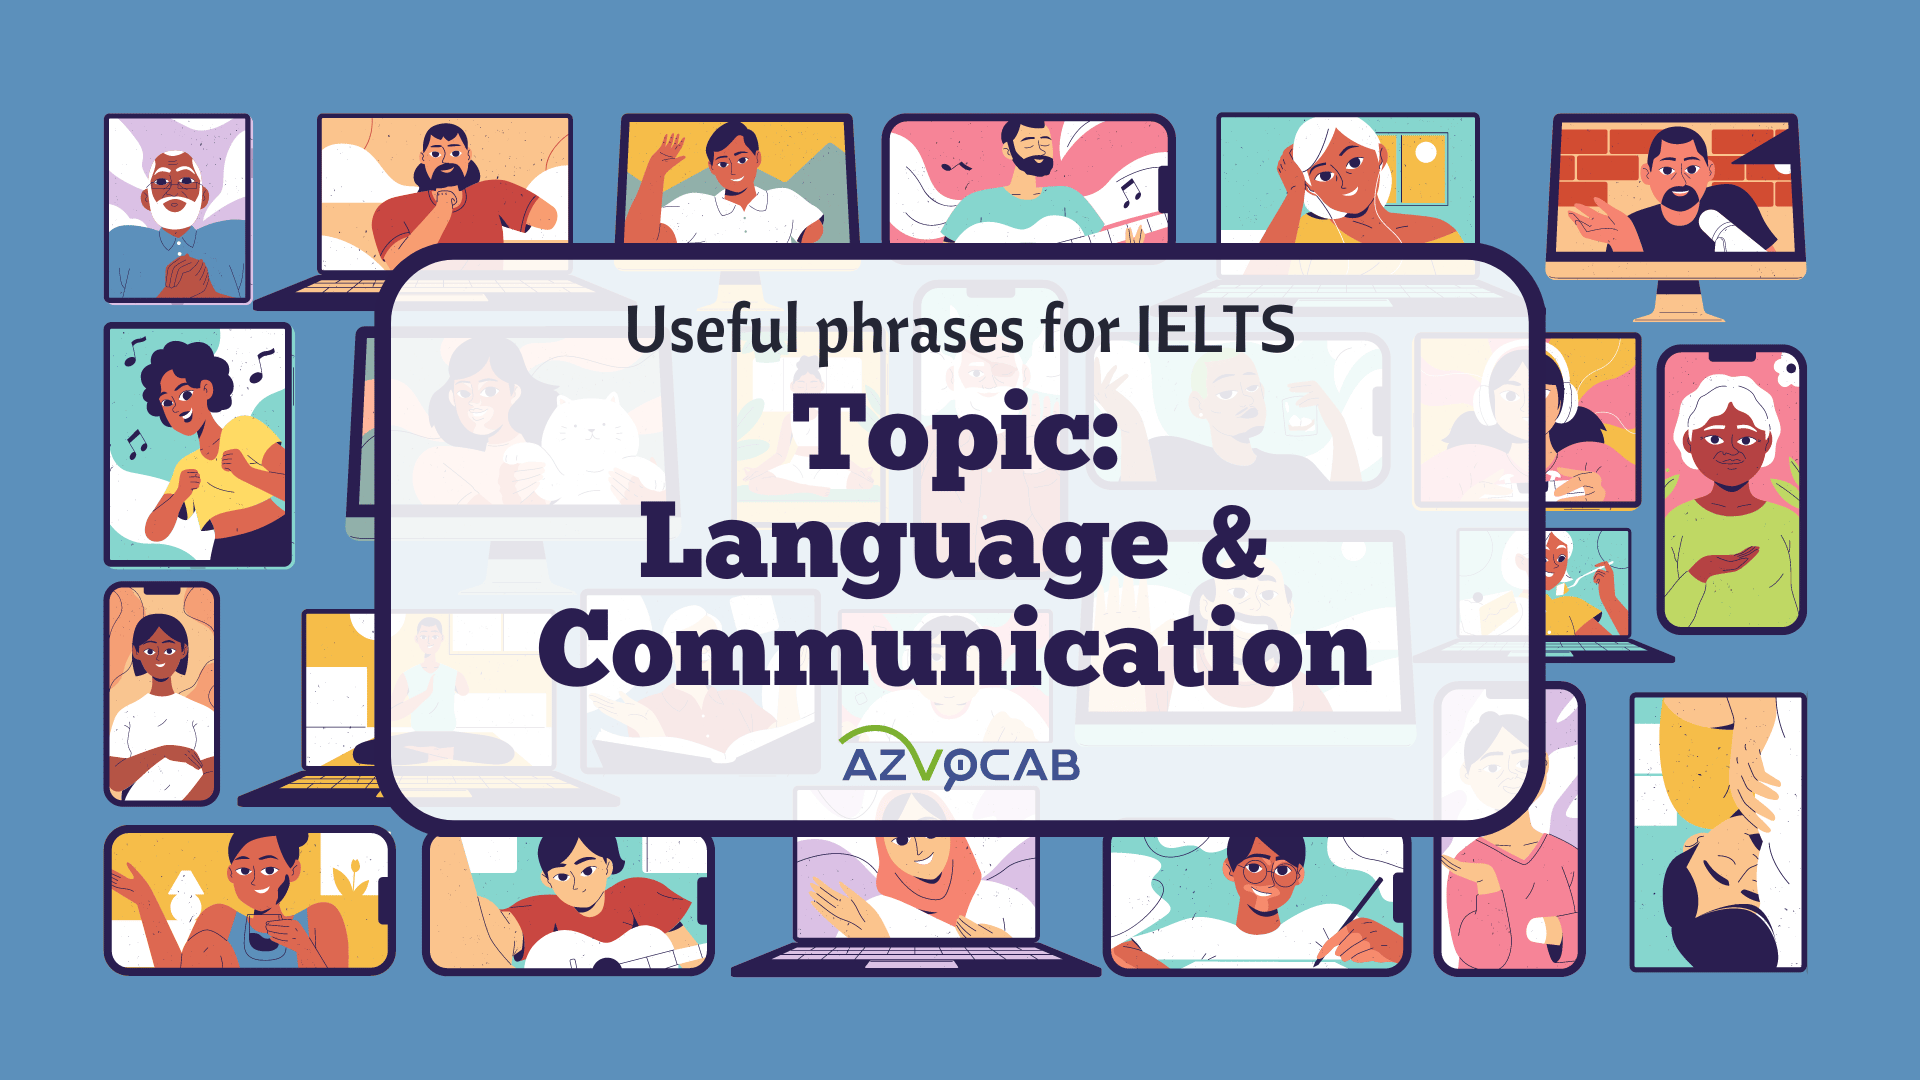 Useful phrases for IELTS Language and Communication